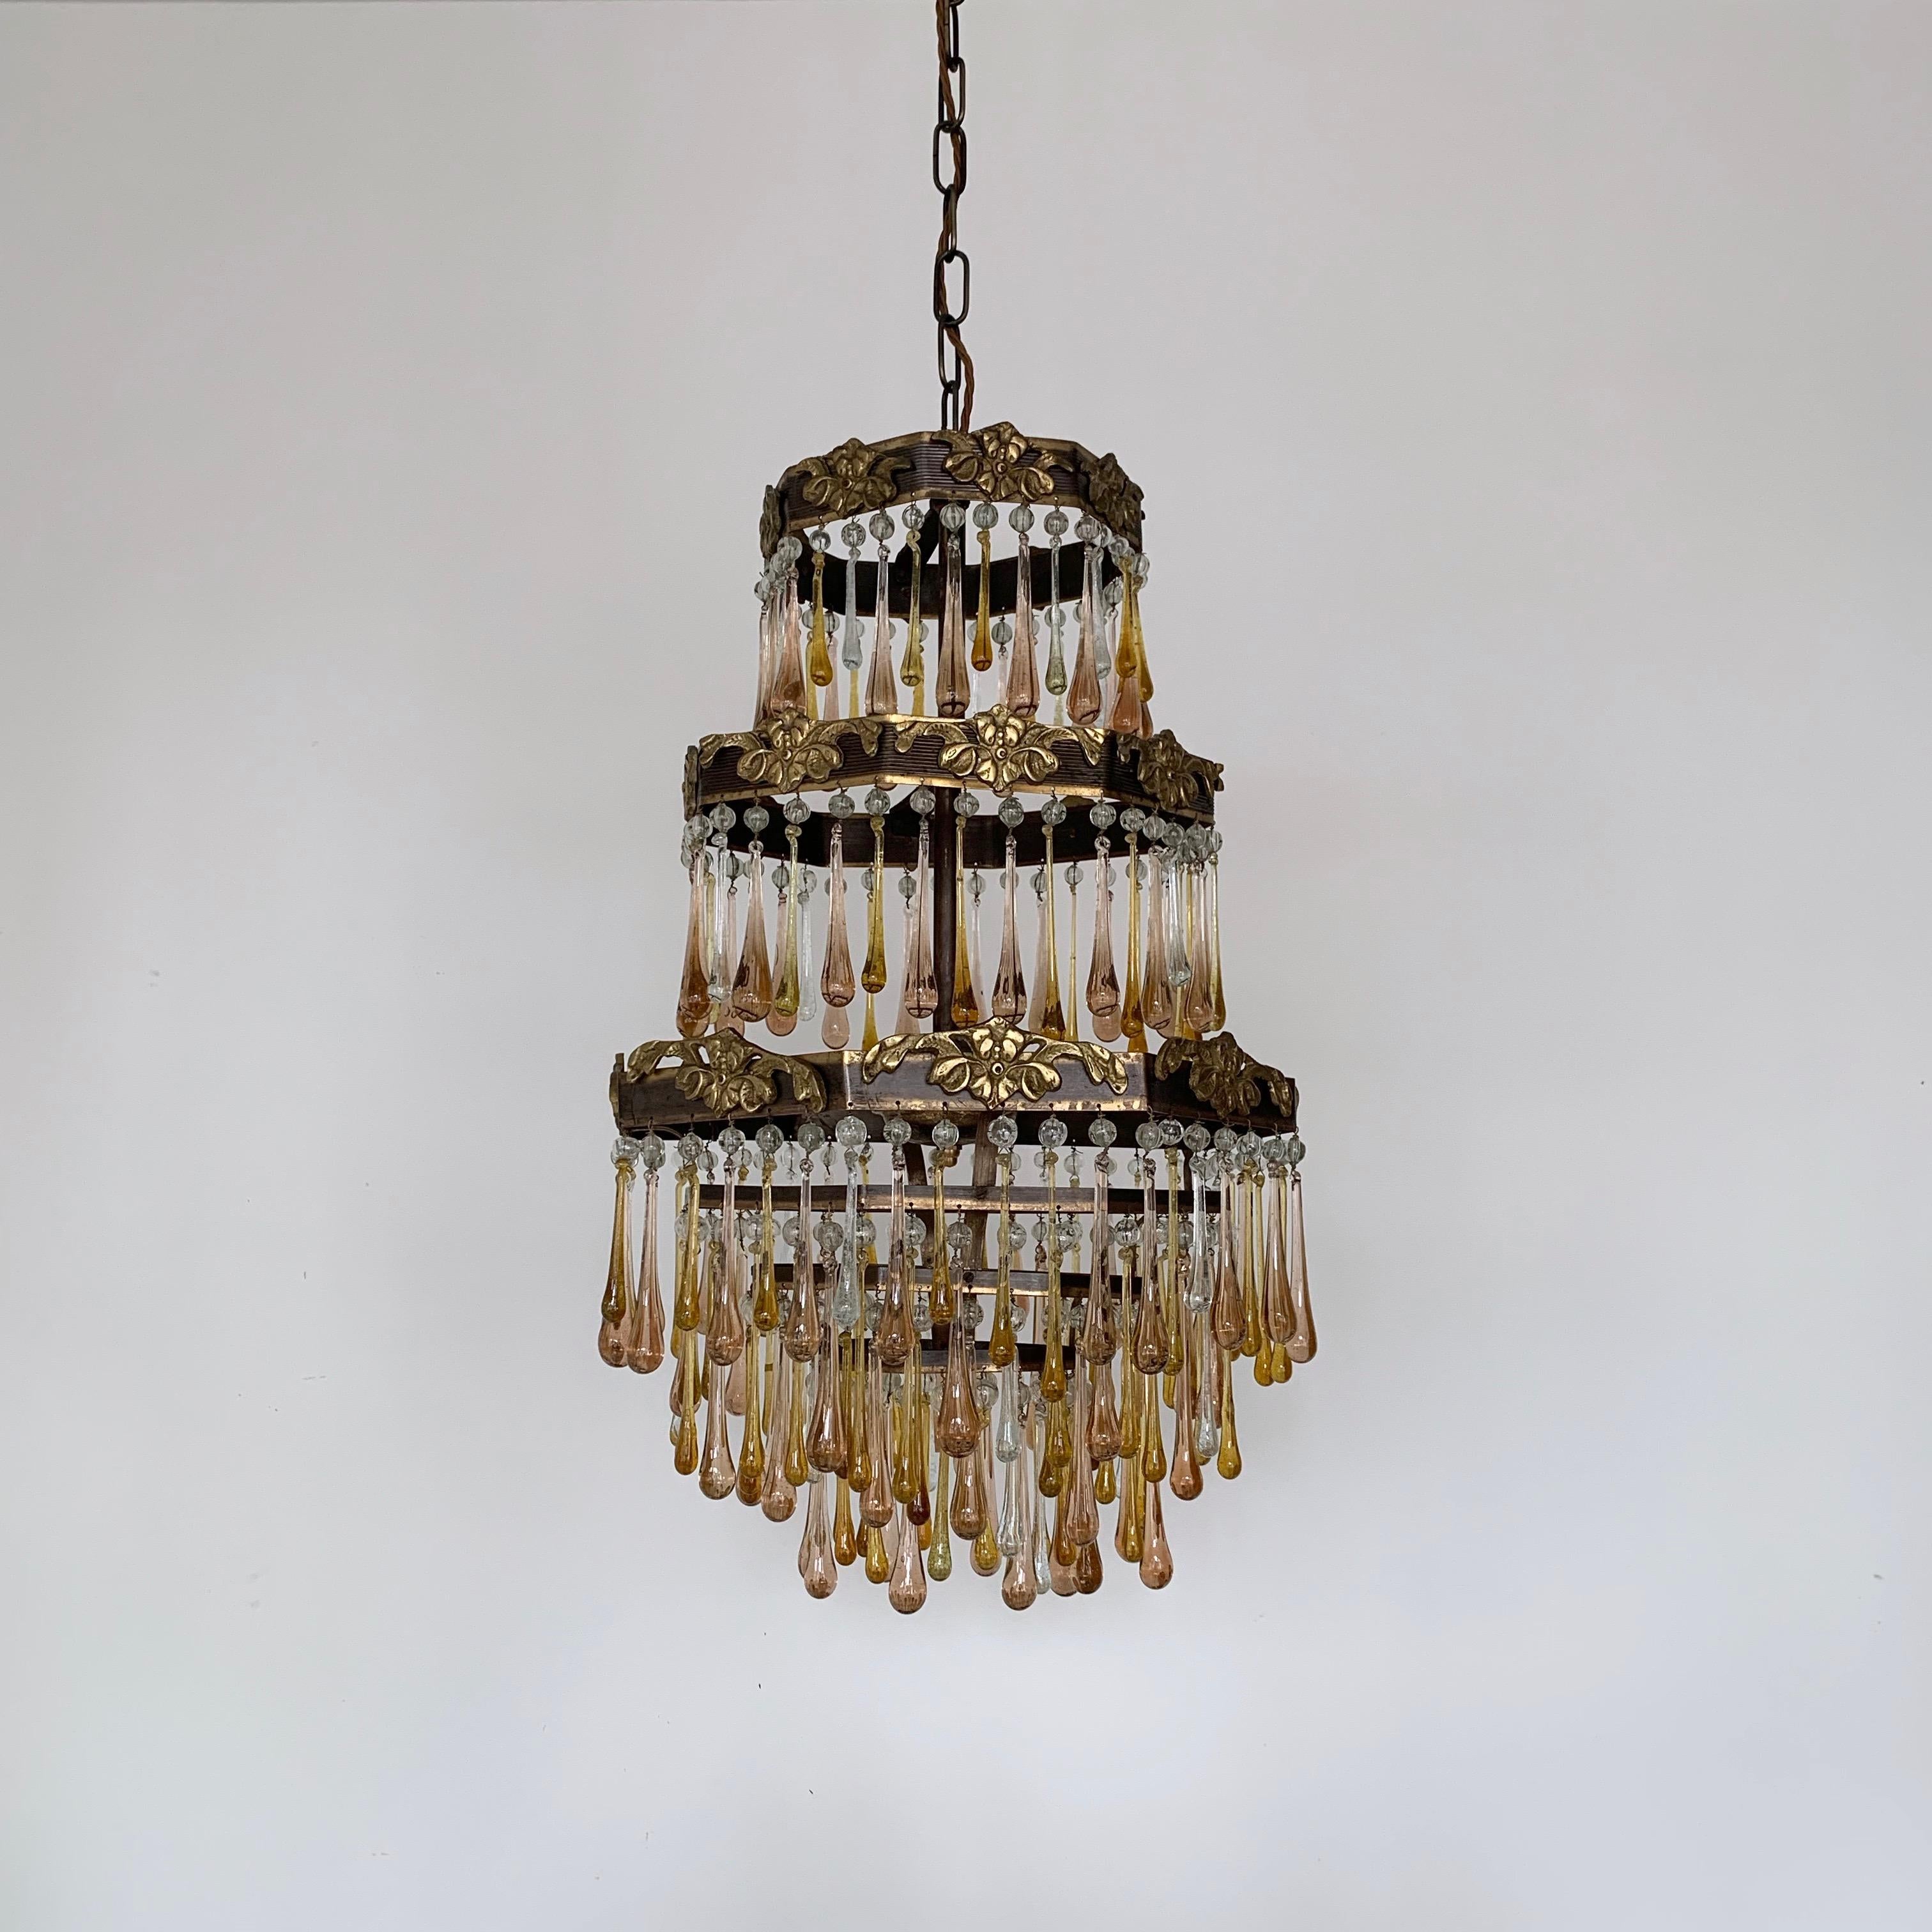 The frame of this peach and amber waterfall chandelier originates from 1920s France. It has been dressed in a mix of contemporary amber and clear glass teardrops with vintage enlarged peach drops, all finished with a clear glass bead. This